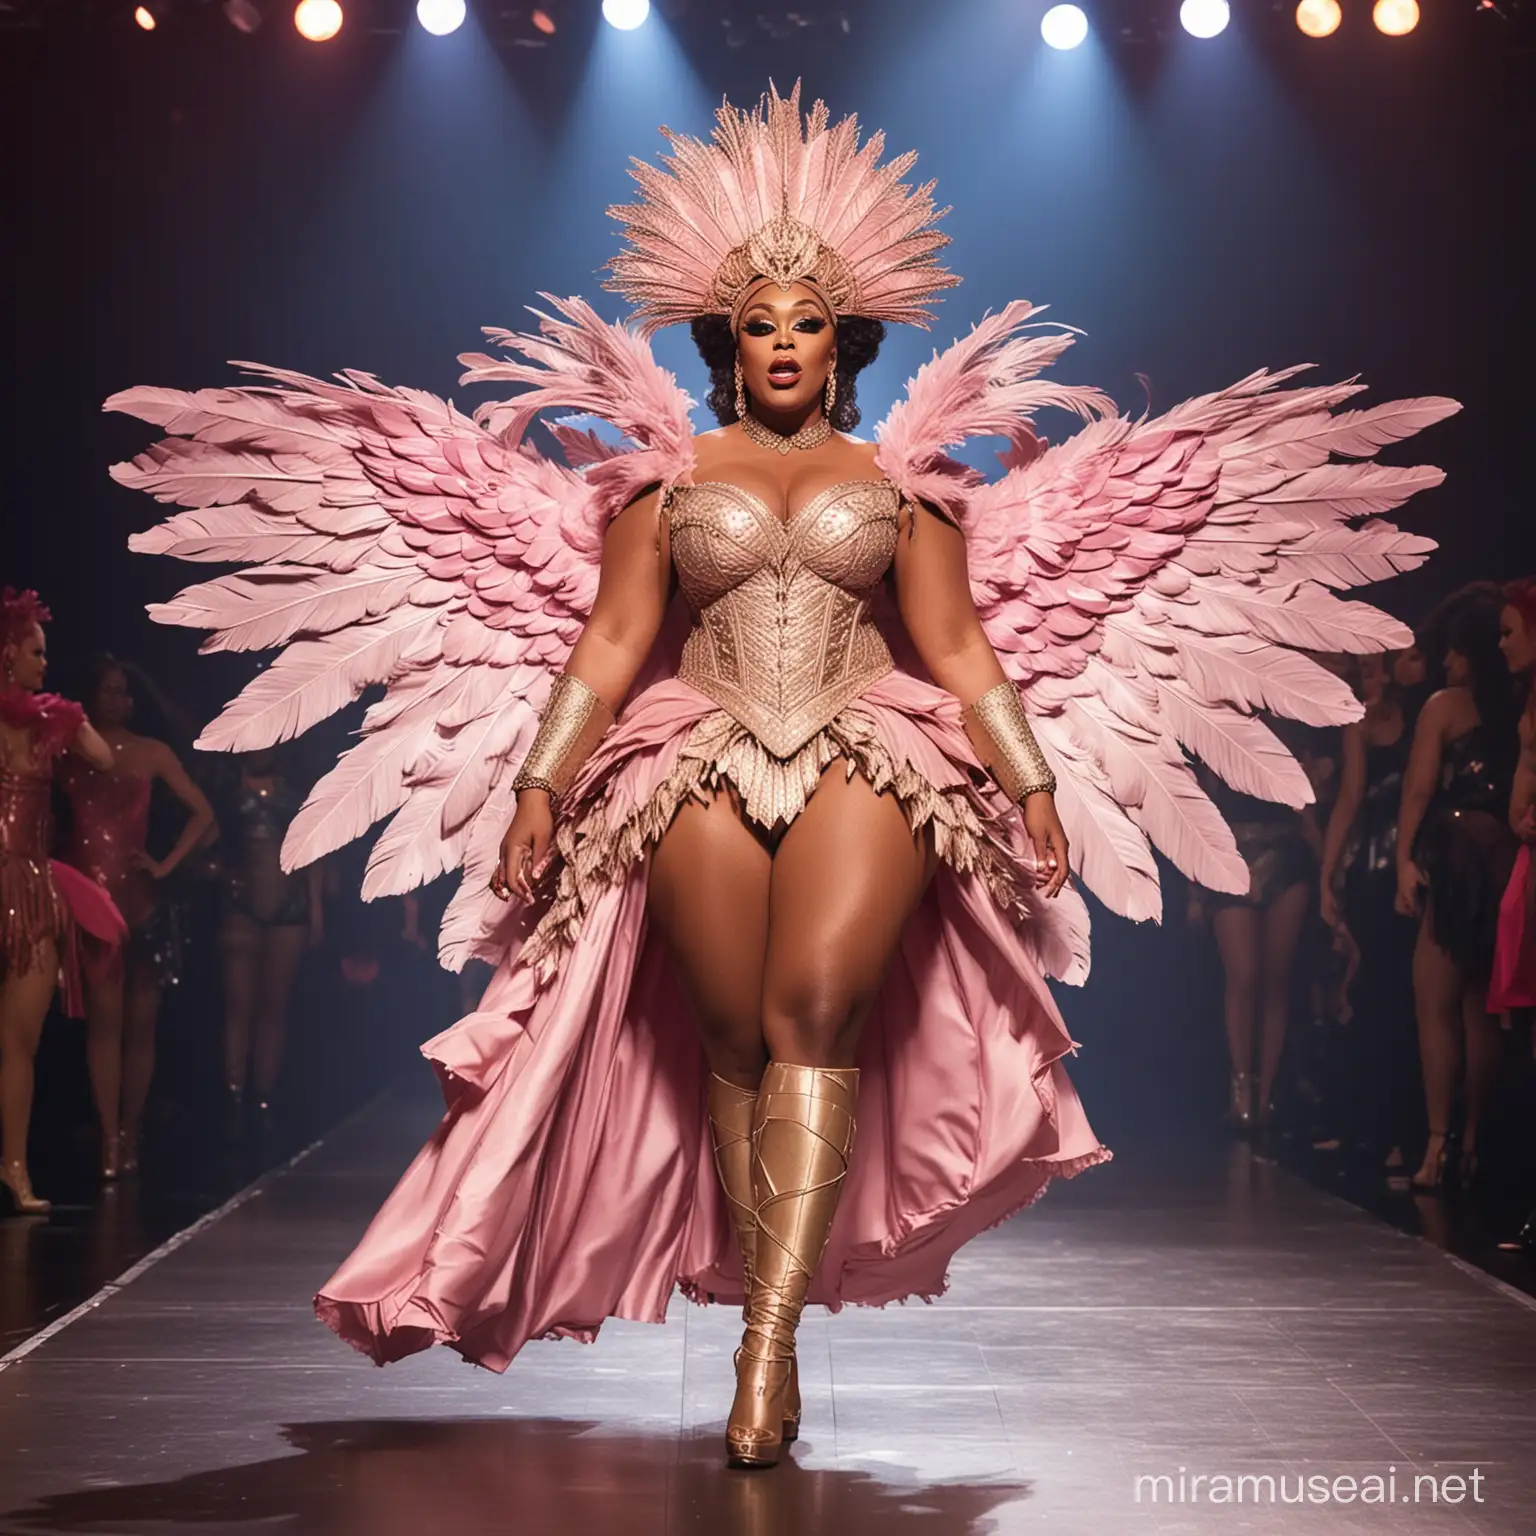 a full body image of a fat african american medieval inspired drag queen walking on the Rupaul's Drag race runway wearing an outfit inspired by the prompt: spread your wings